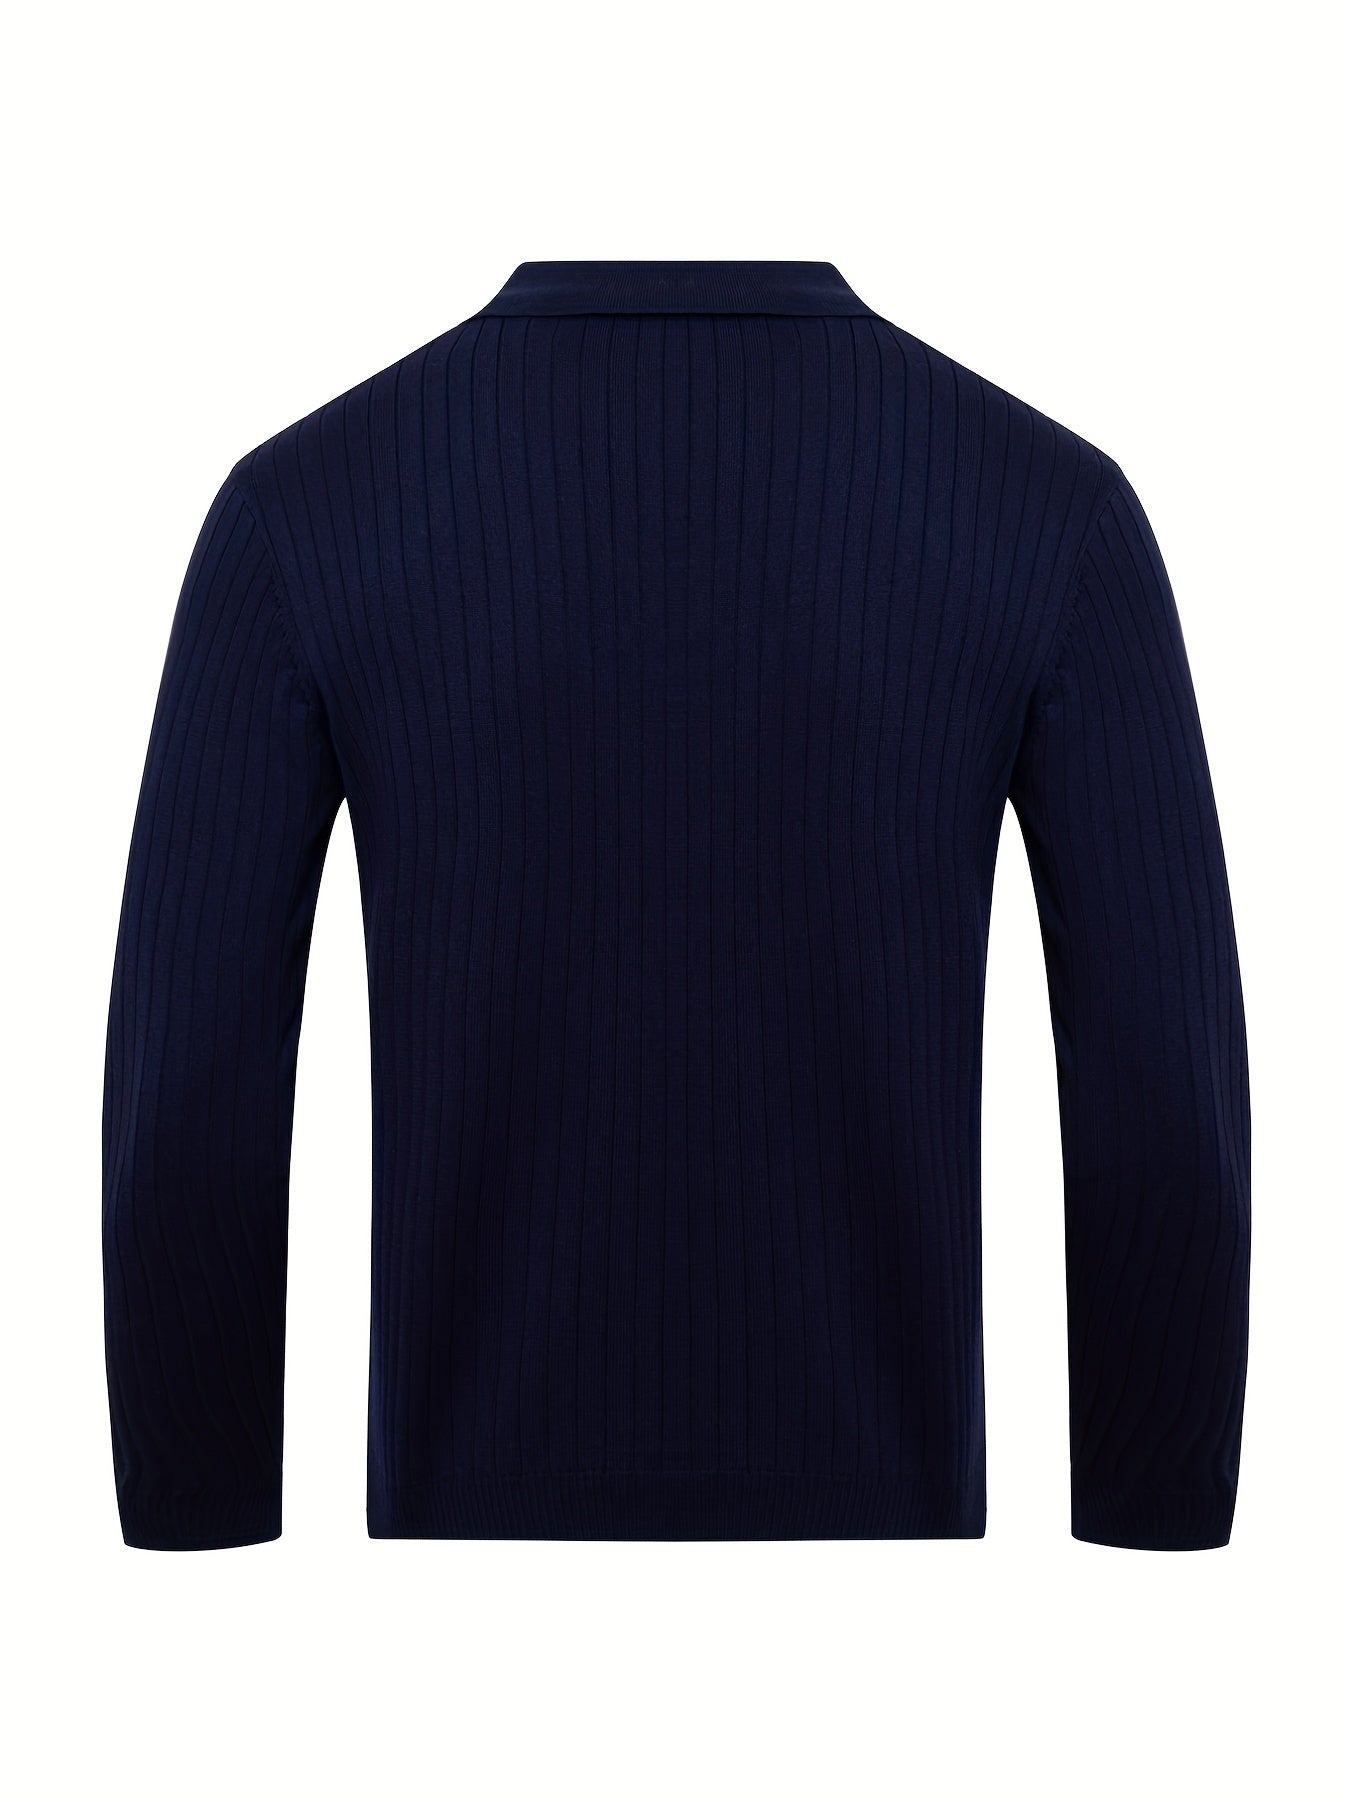 Foruwish - Chic Knit Shirt, Men's Casual Stylish Lapel Middle Stretch V-Neck Pullover Sweater For Winter Autumn